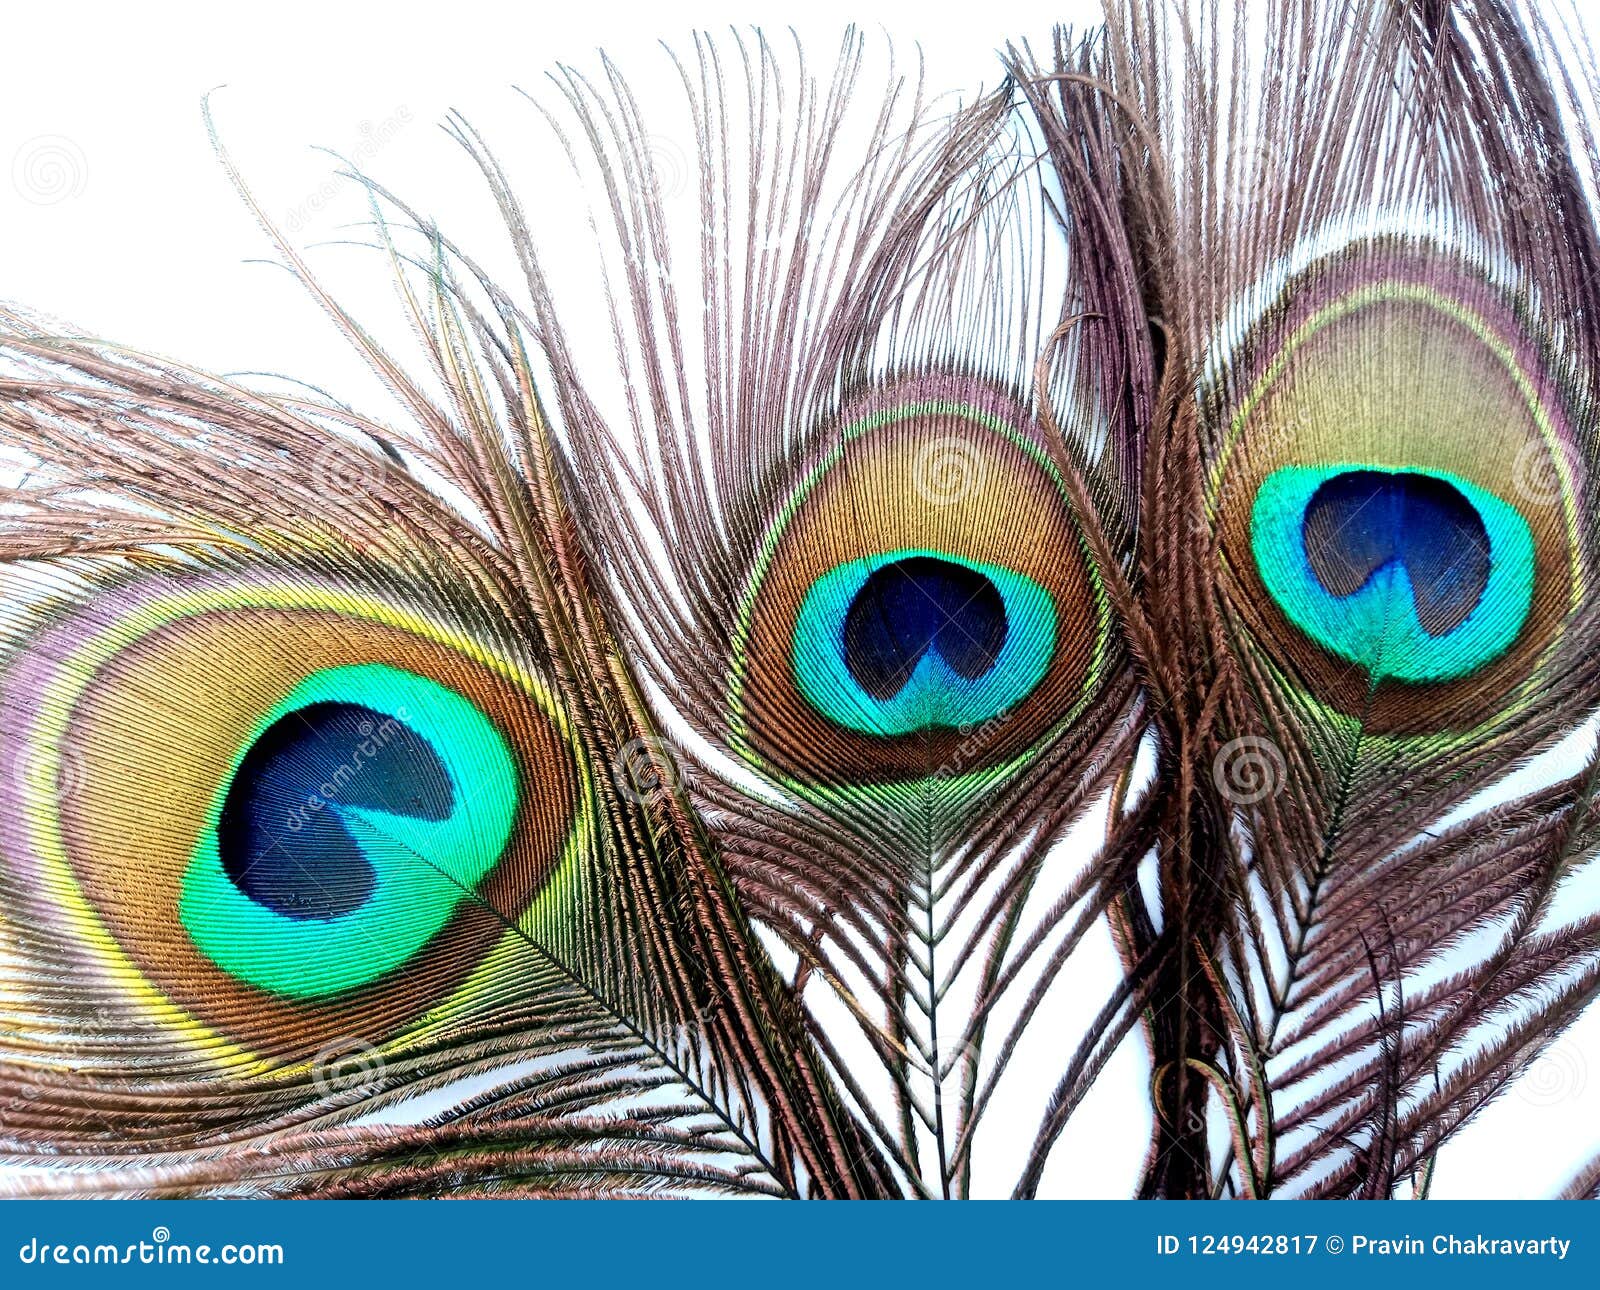 Peacock Feathers Close Up Isolated on a White Background. Stock Image ...